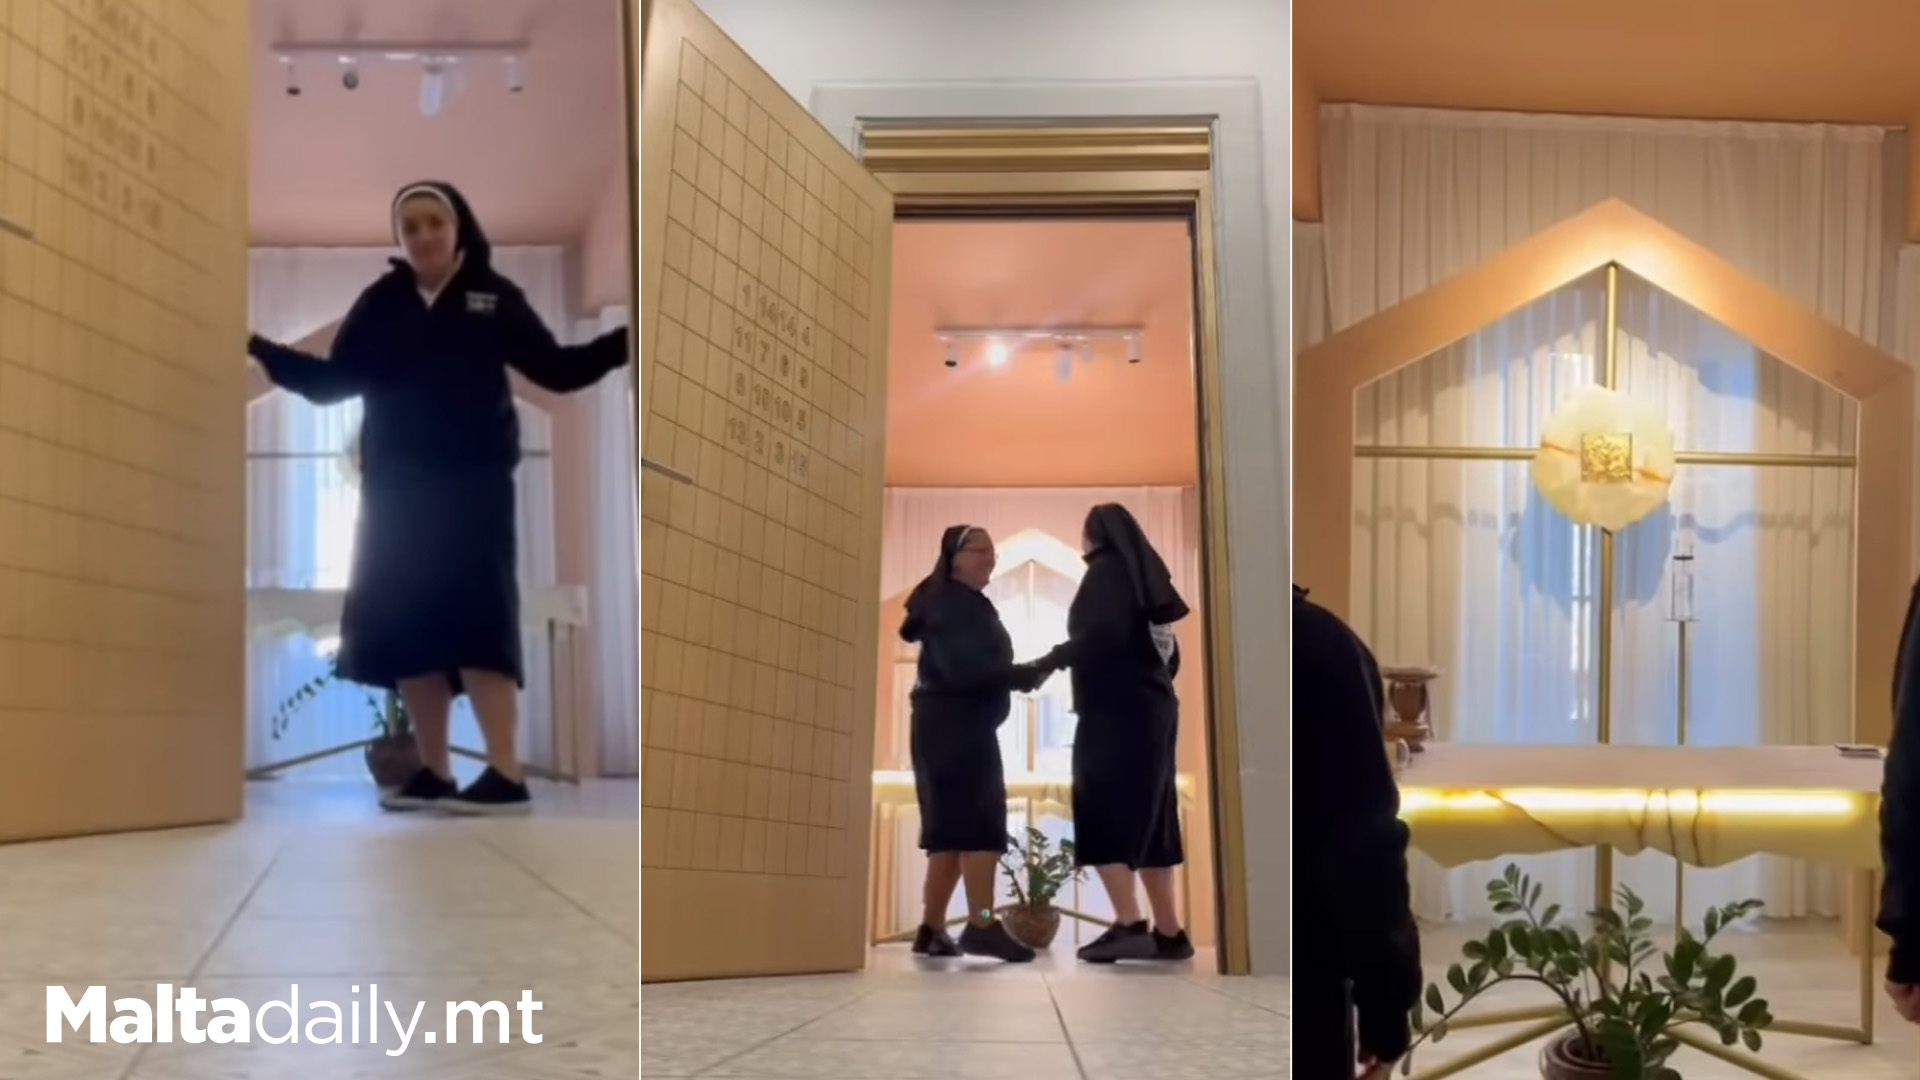 Sisters Create Wholesome Video For World Vocations Day